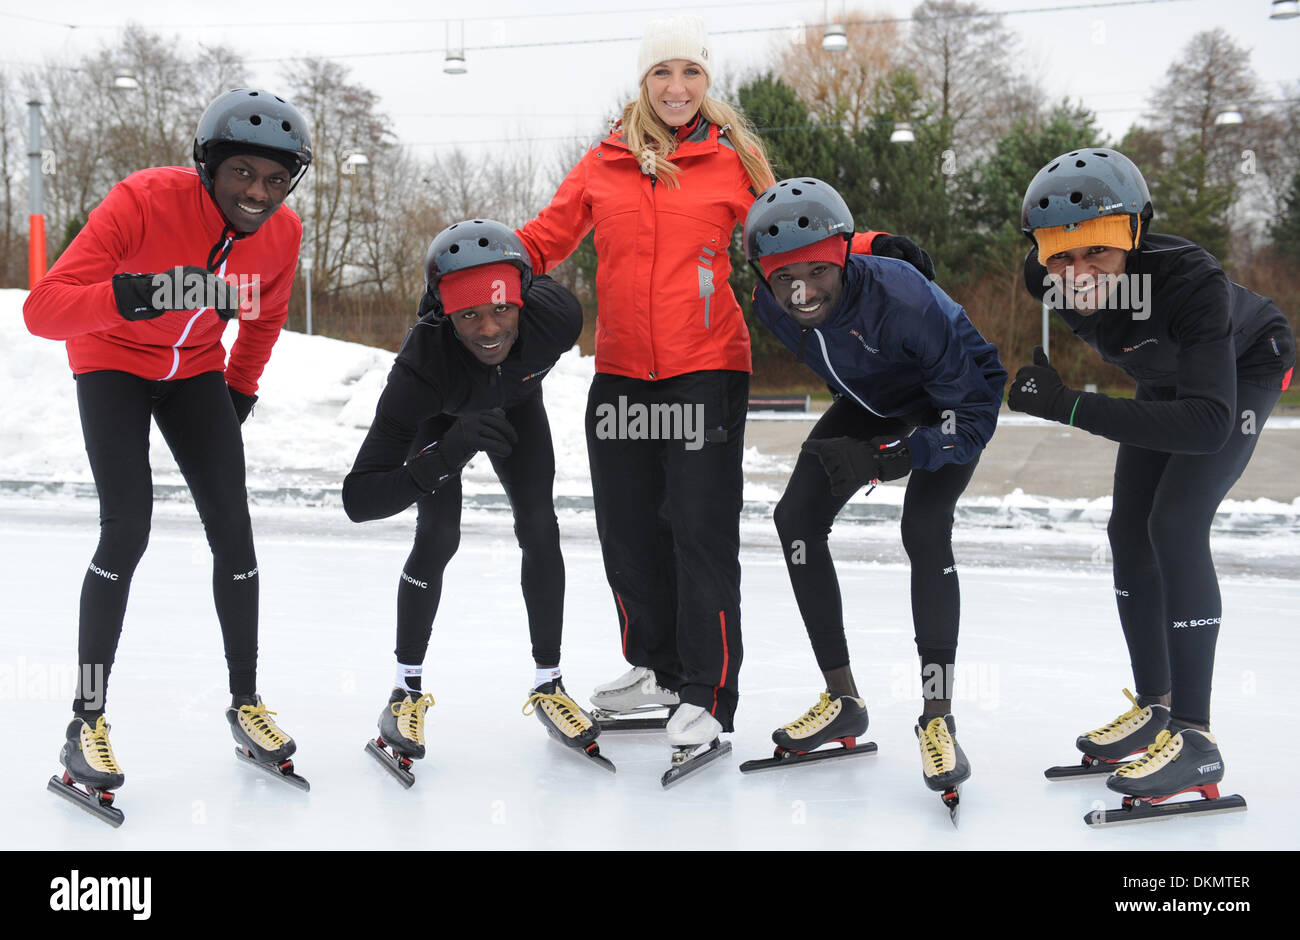 Munich, Germany. 07th Dec, 2013. Olympic speed skating gold medalist Anni Friesinger-Postma poses with Kenya's Amos (L-R), Isaac, Samy und Leonard at the speed skating rink in Munich, Germany, 07 December 2013. They are preparing for the 100km speed skating marathon at the end of January 2014 under the motto 'Real Cool Runnings. From Kenya on the Ice.' The young men from Eldoret are actually athletics athletes and have never been on the ice before. The project can be followed on television channel VOX every Tuesday at 8:15 pm. Photo: ANDREAS GEBERT/dpa/Alamy Live News Stock Photo